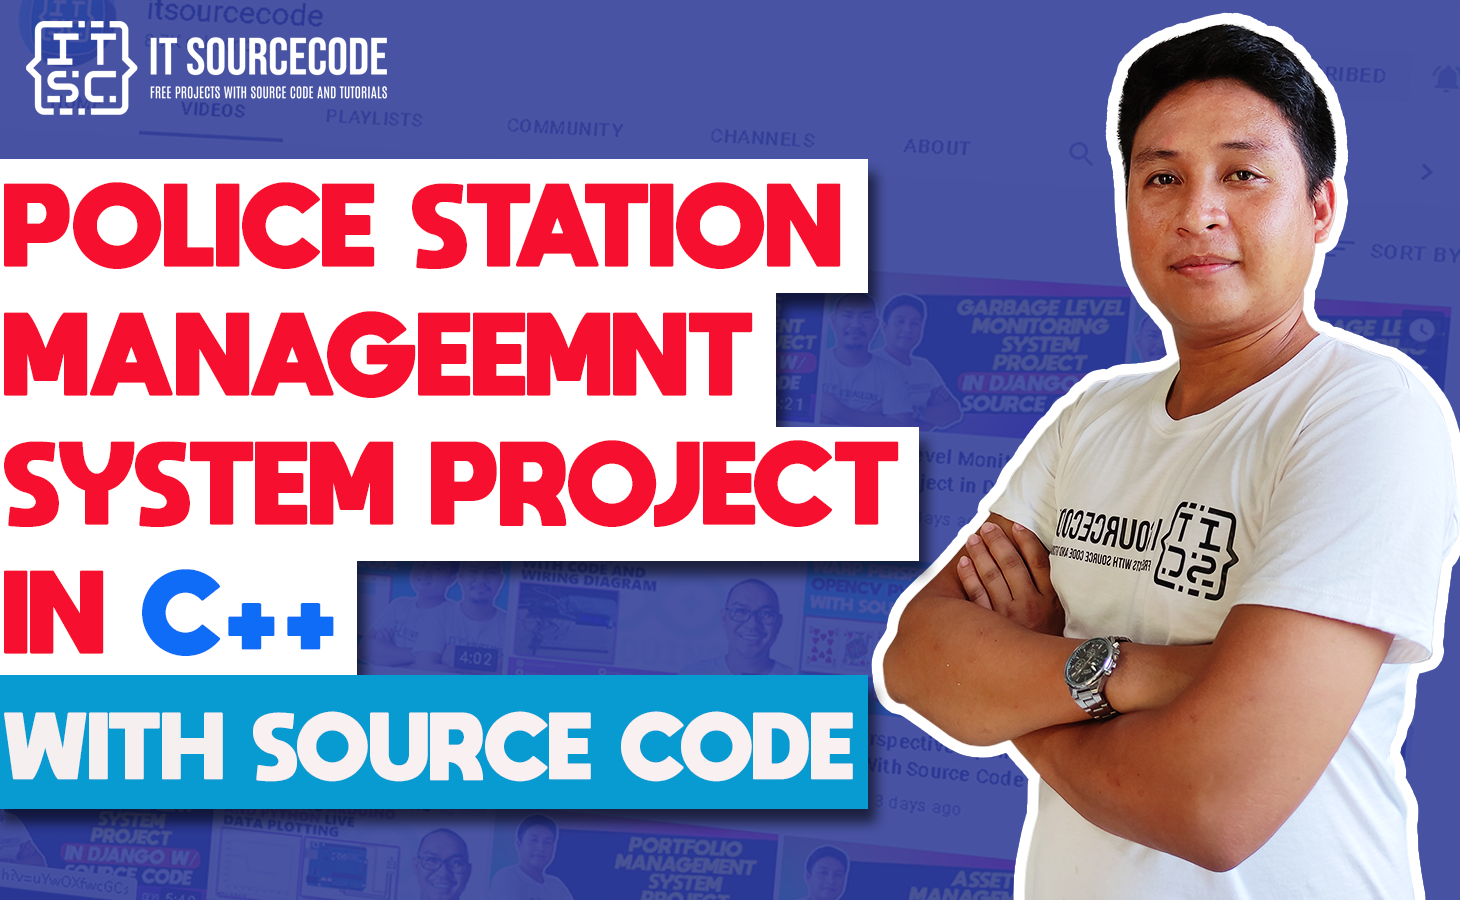 Police Station Management System Project in C++ with Source Code